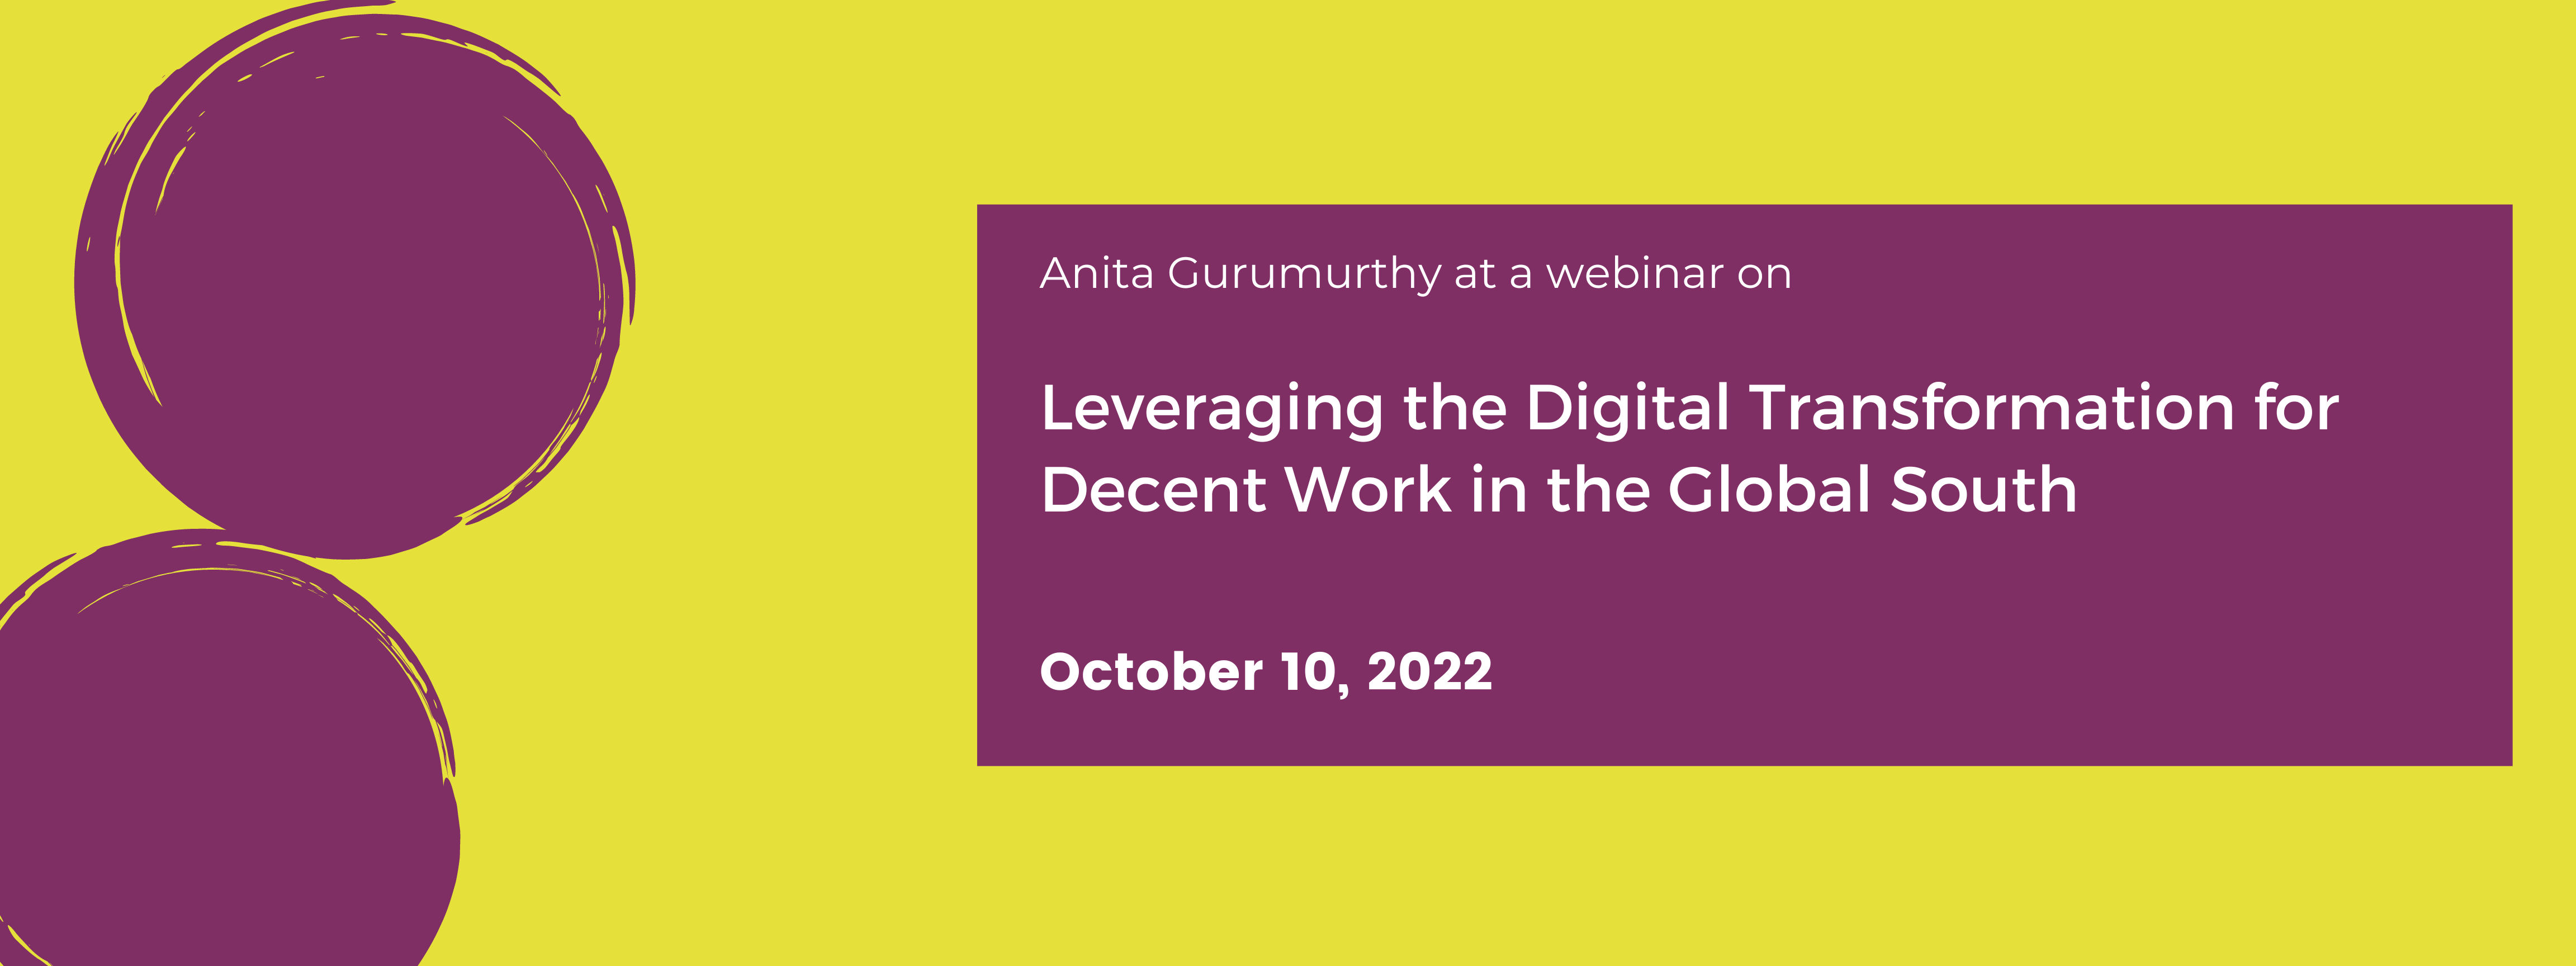 Leveraging the Digital Transformation for Decent Work in the Global South